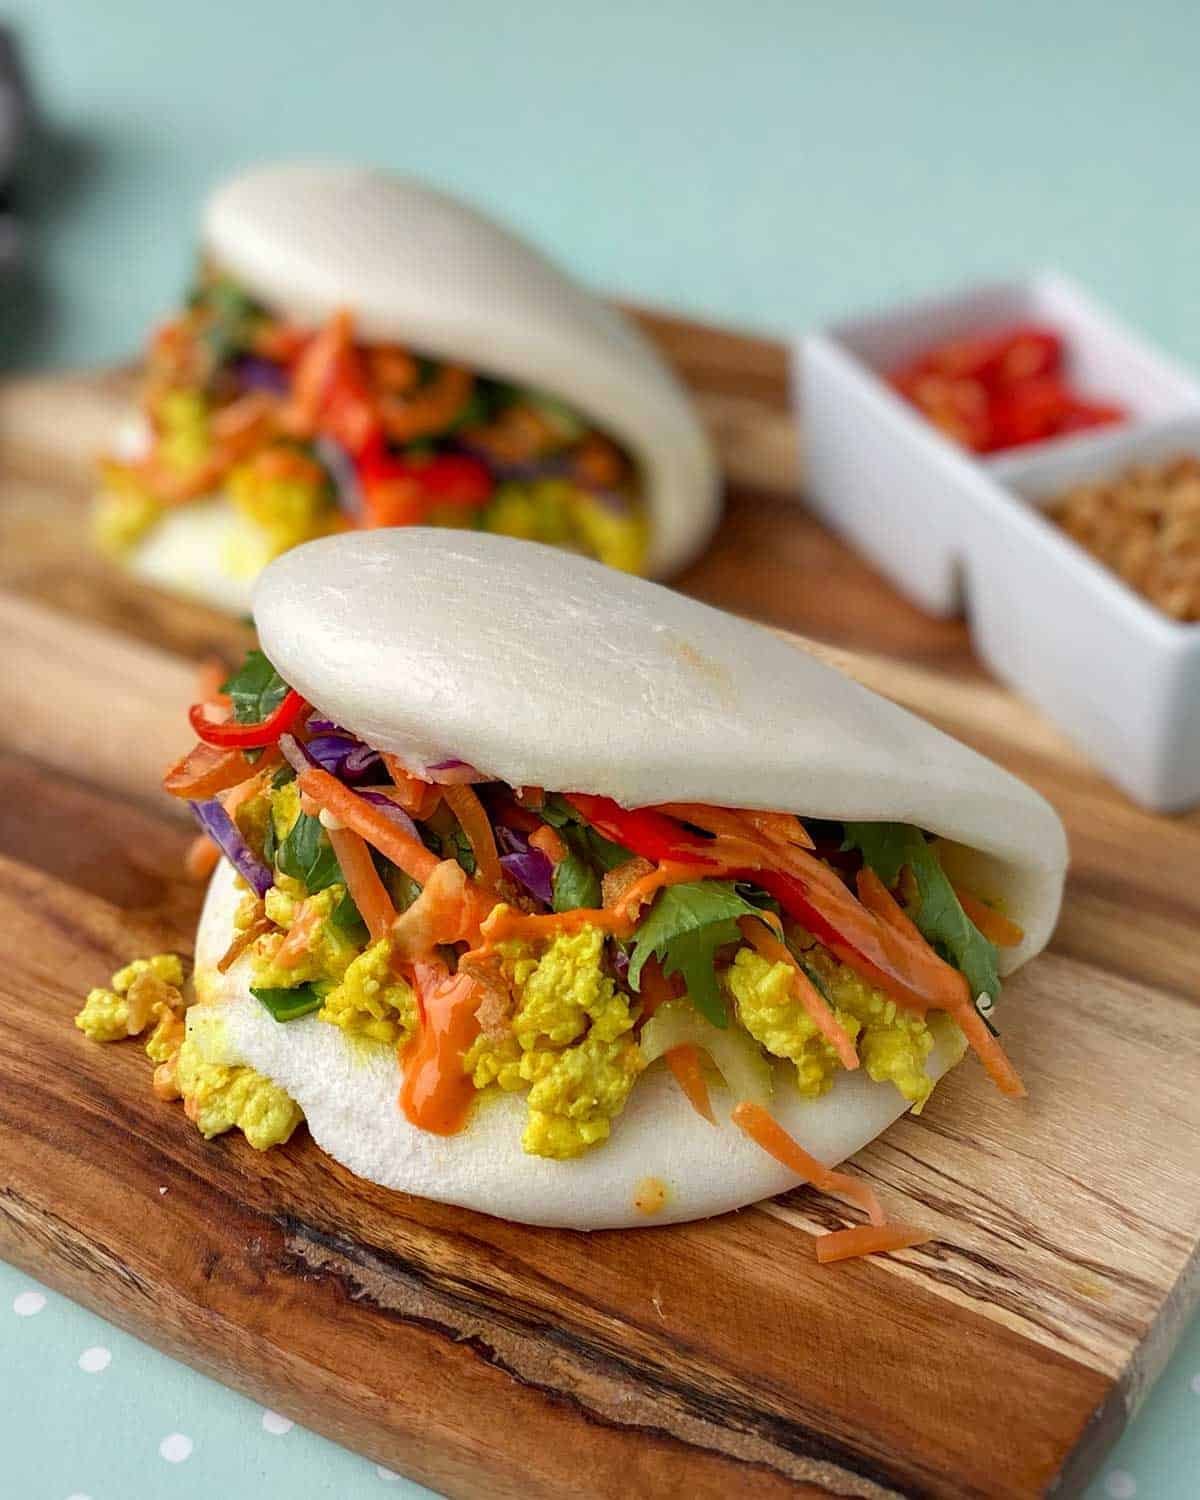 Two Coconut Chicken Bao Buns sitting on a wooden chopping board.